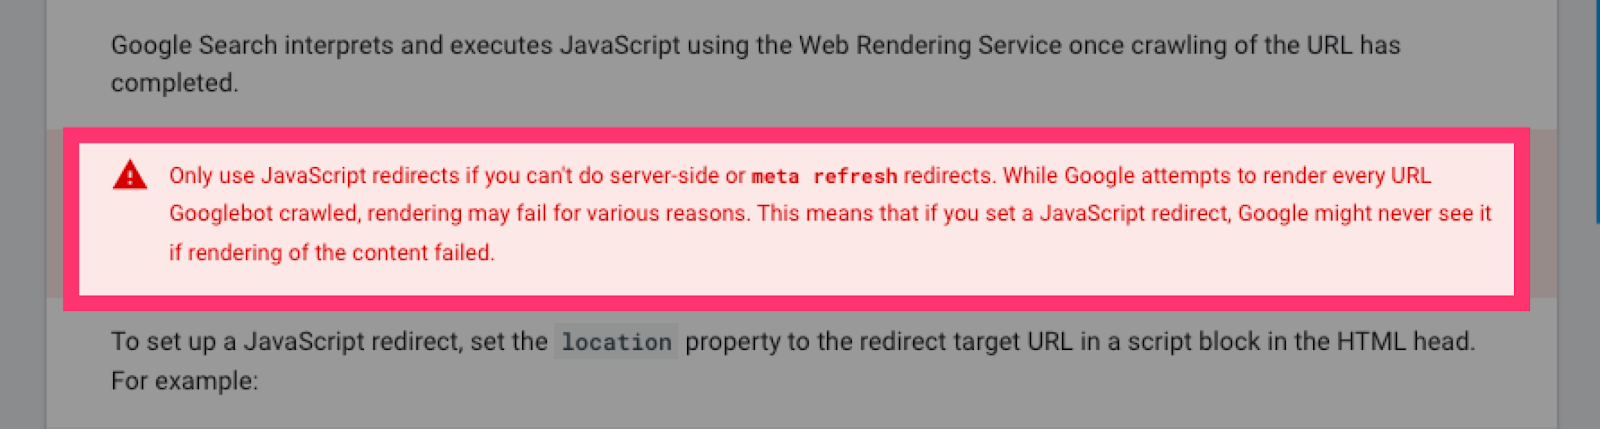 Google advises you to avoid using JavaScript redirects